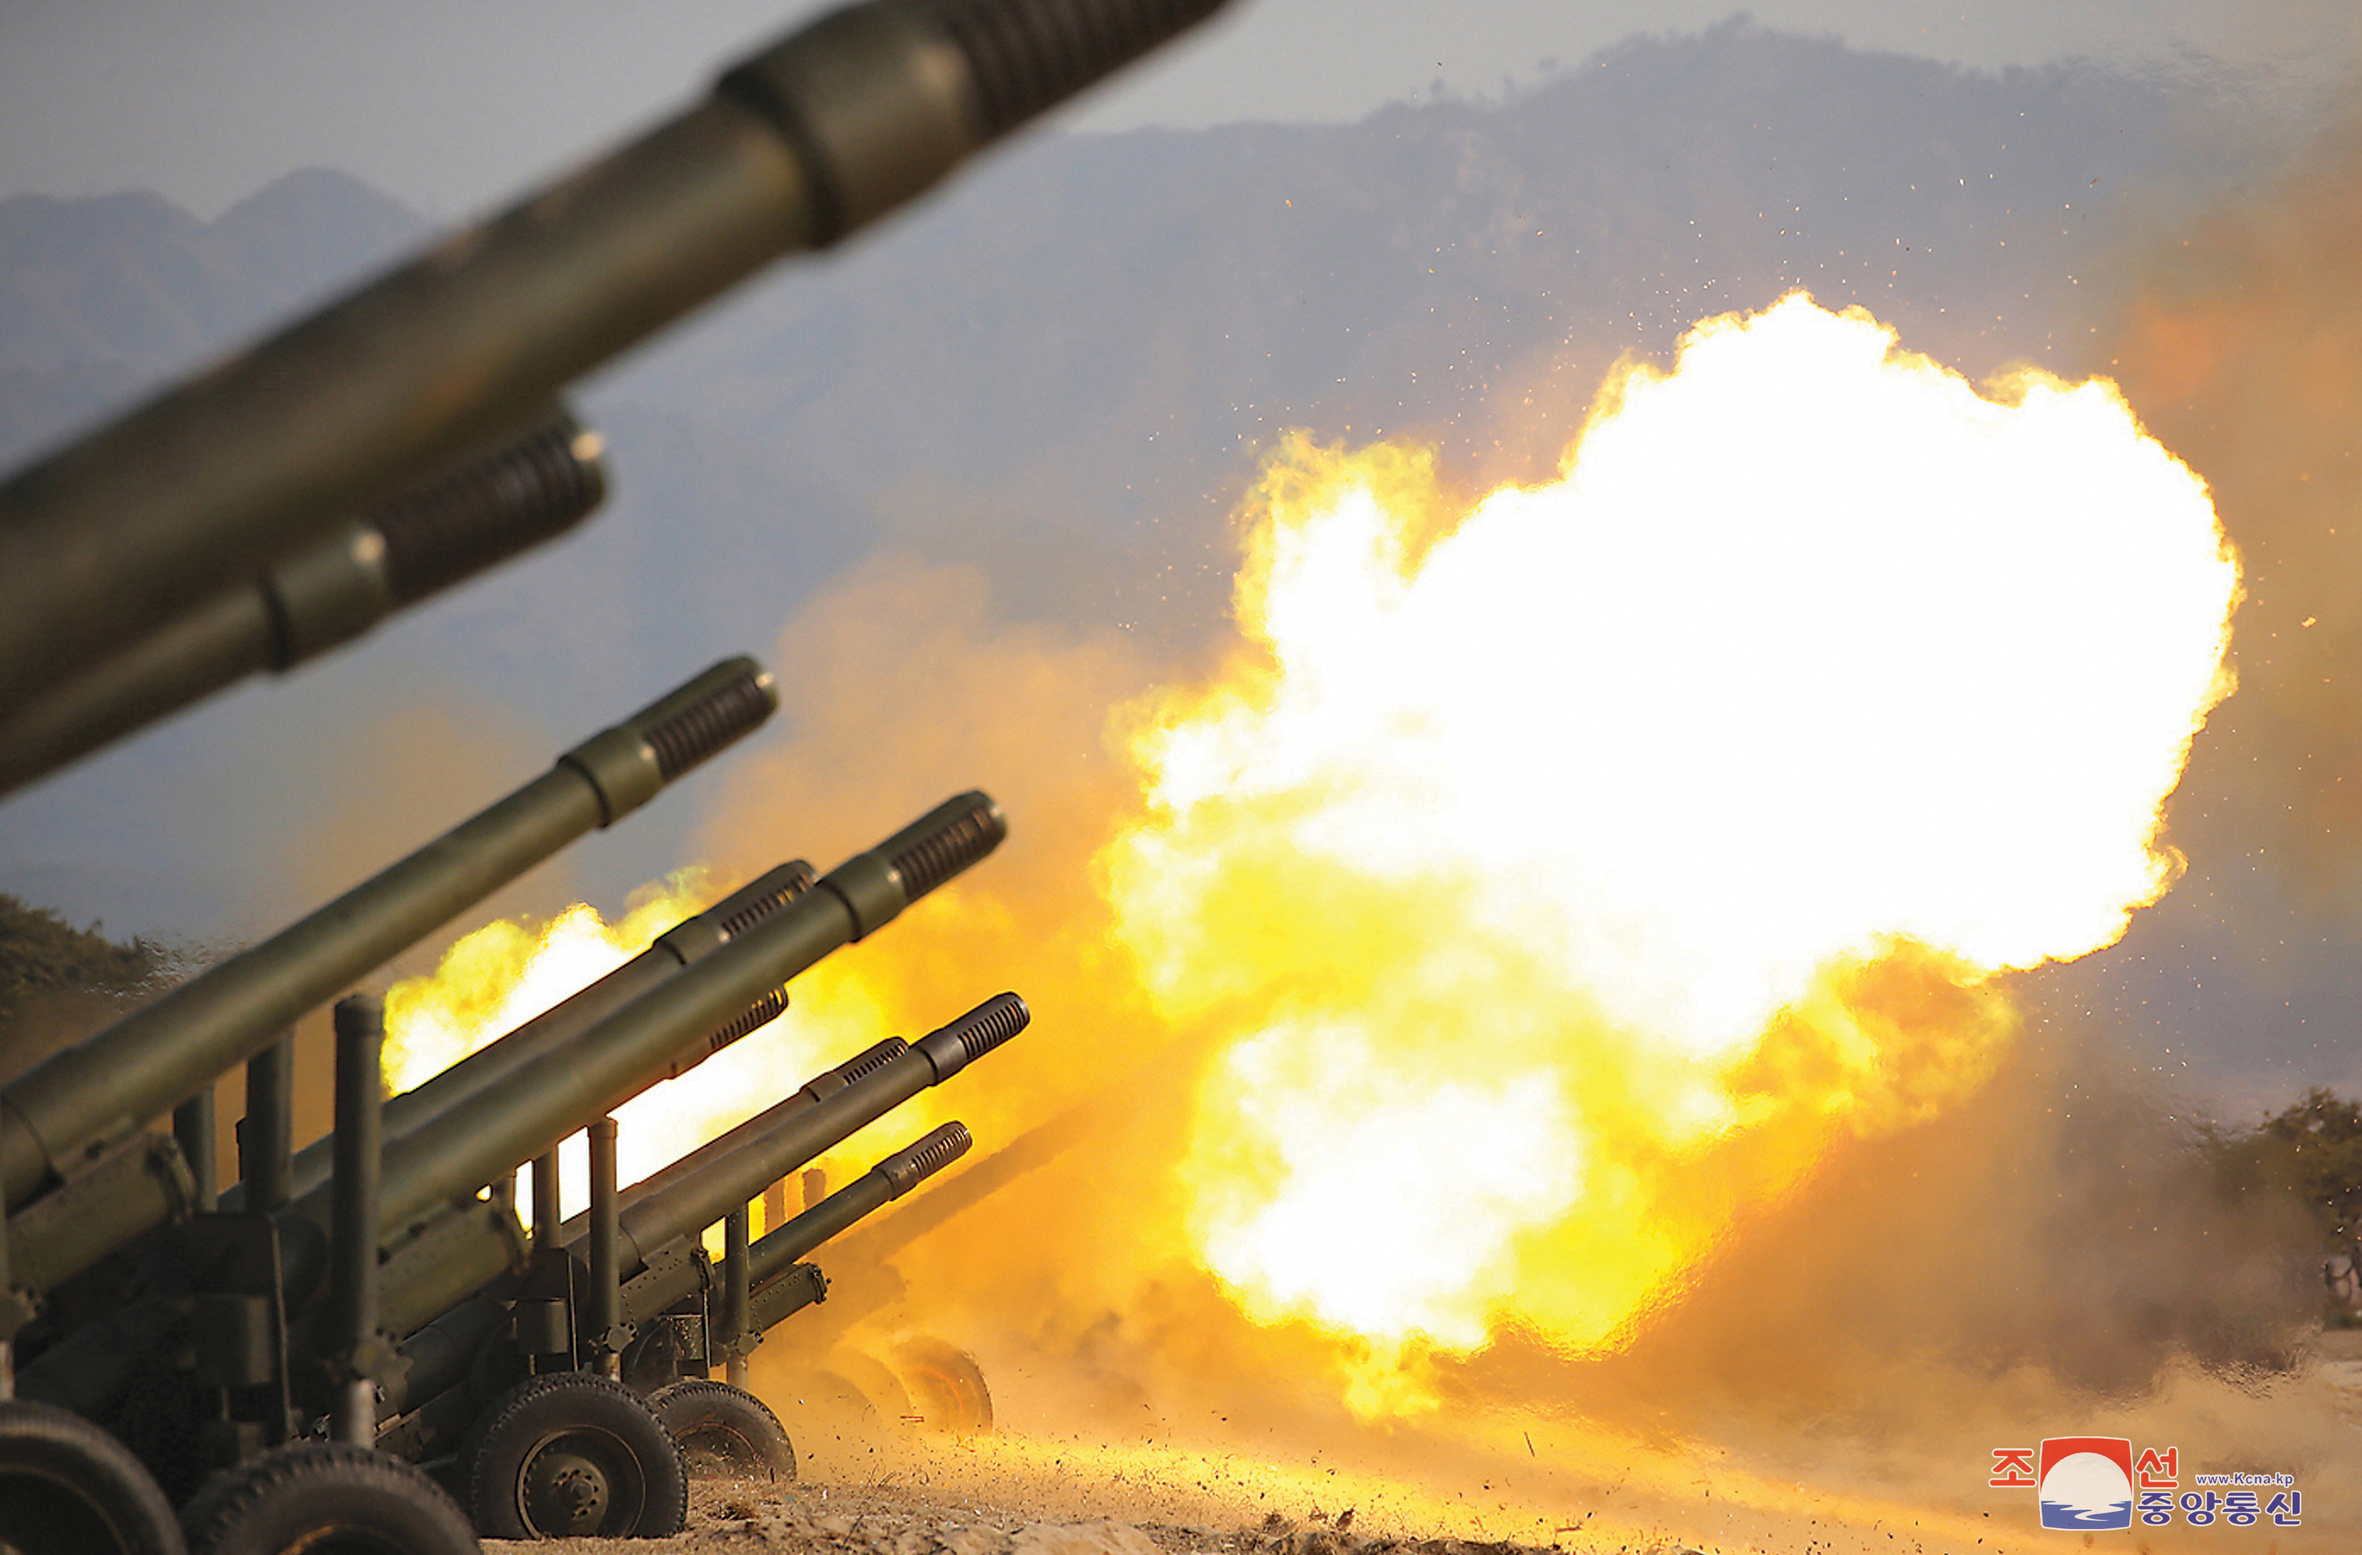 An artillery fire competition between the artillery units under the Korean People's Army Corps 7 and Corps 9 takes place at a training ground in North Korea on March 12, 2020.